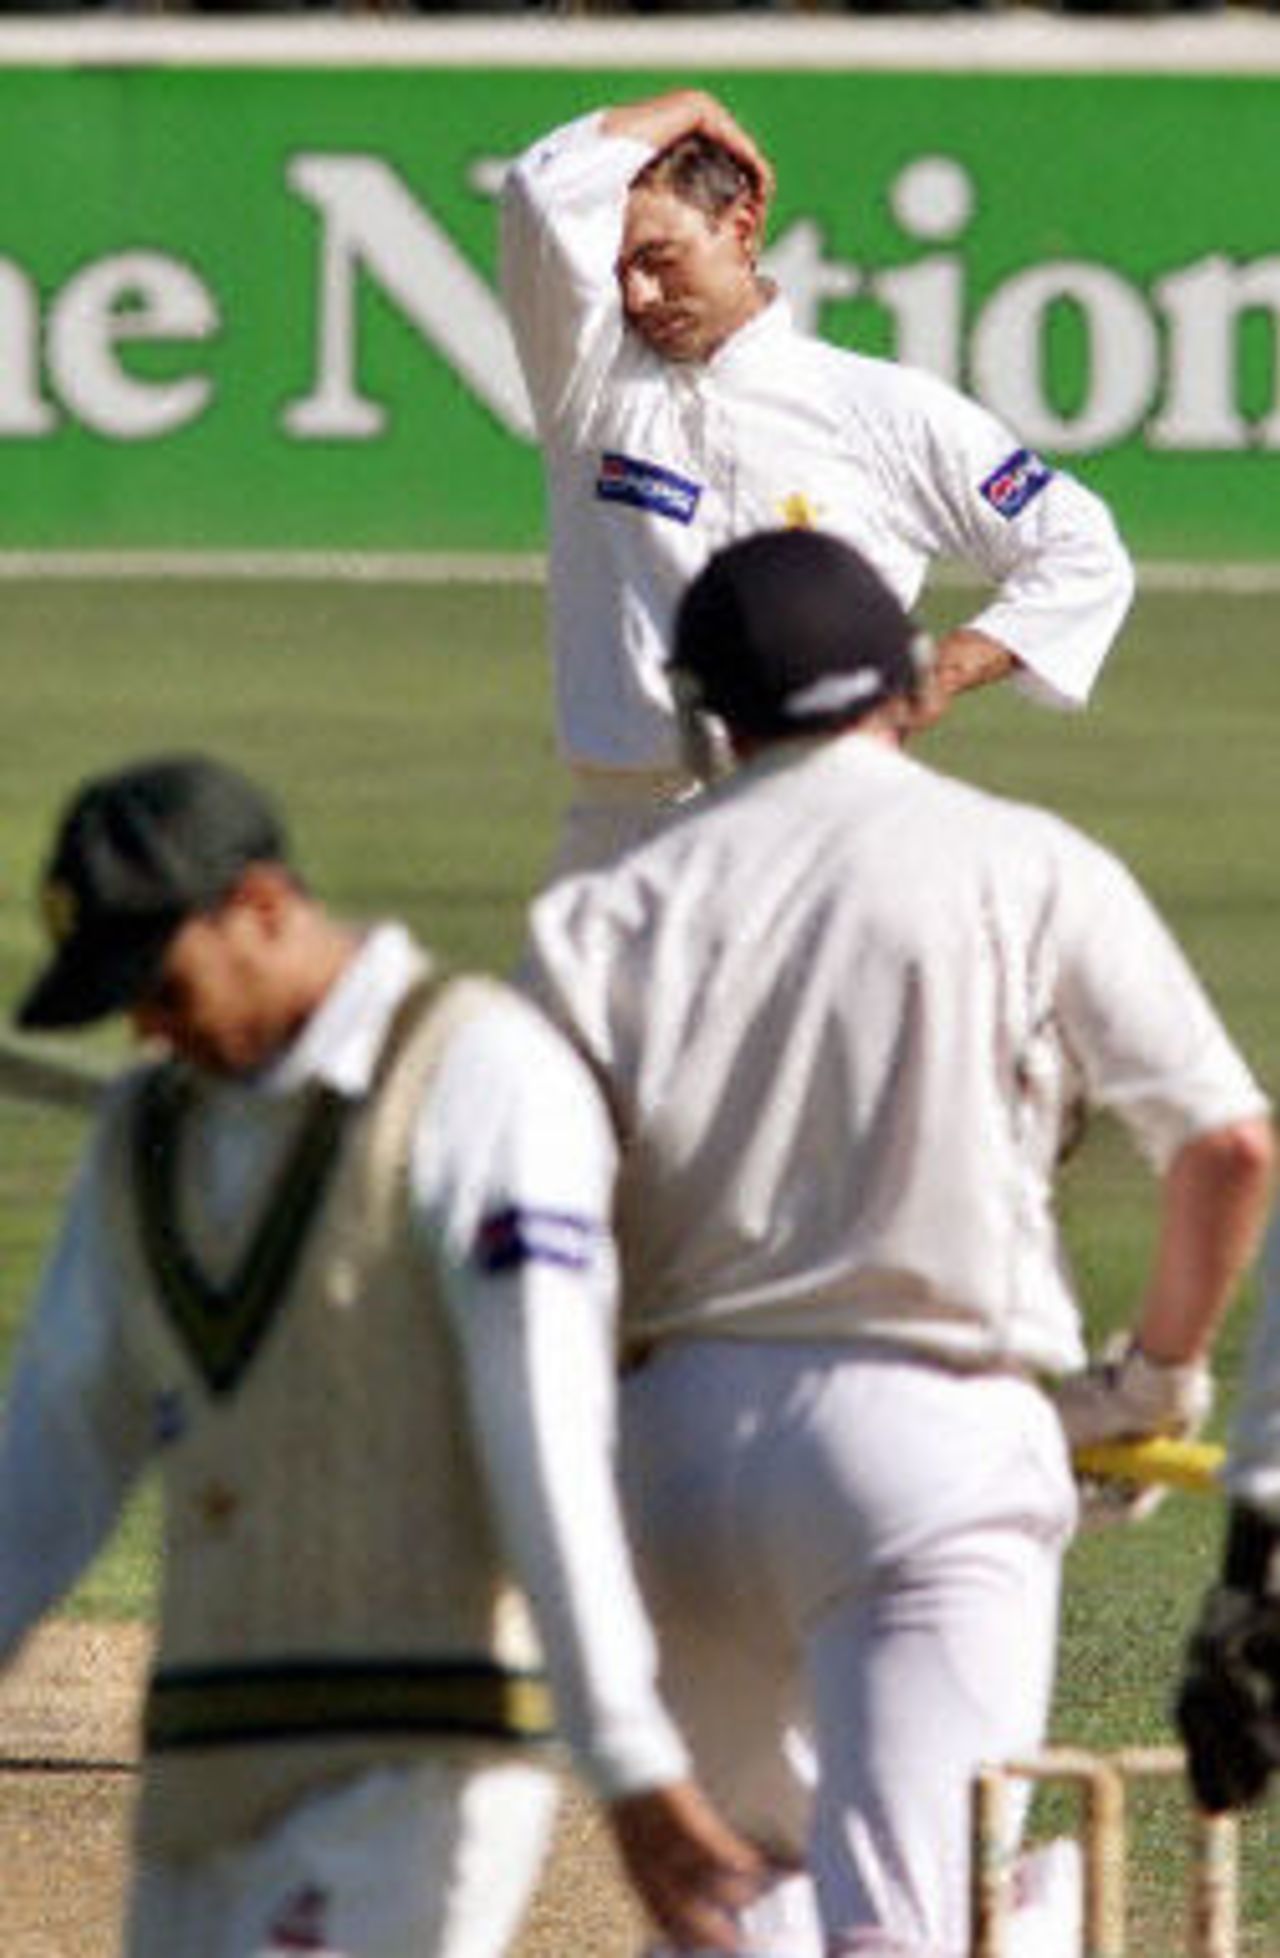 Saqlain Mushtaq shows frustration as New Zealand pile on runs, day 2, 2nd Test at Christchurch, 15-19 March 2001.